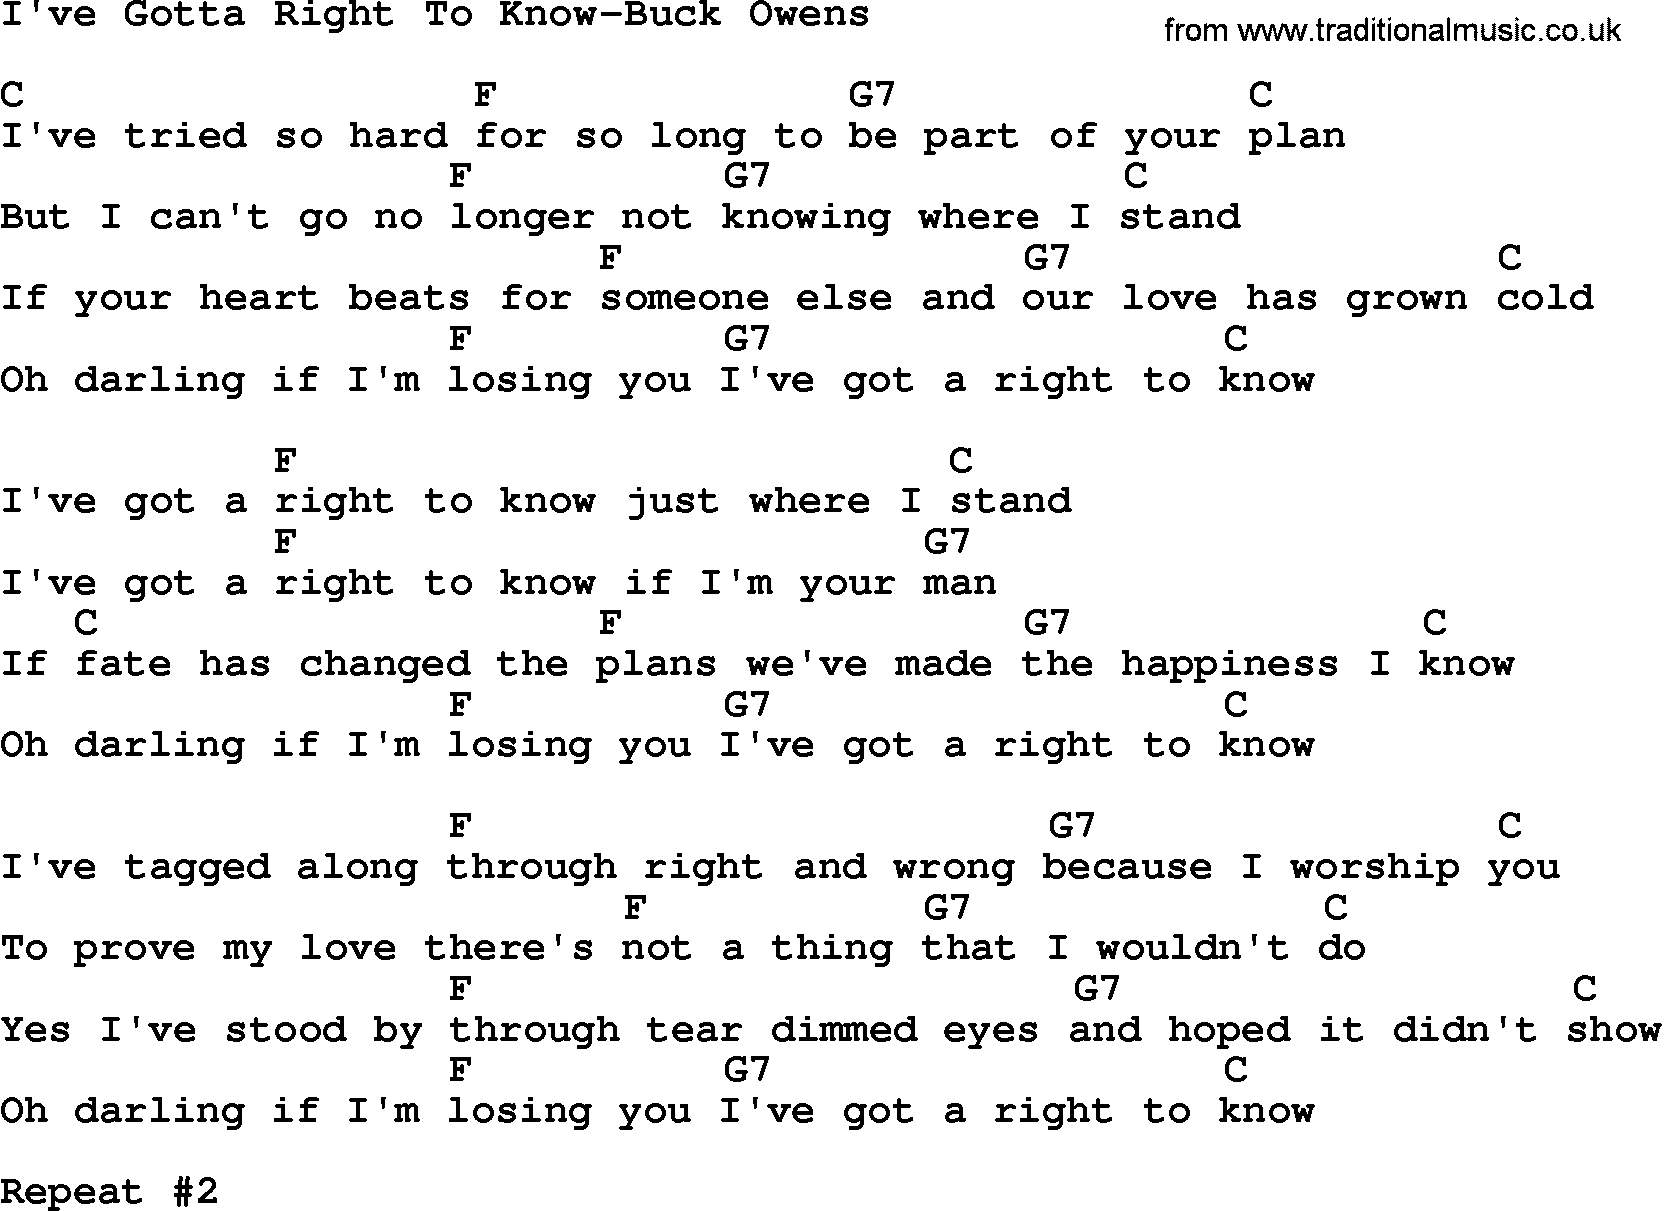 Country music song: I've Gotta Right To Know-Buck Owens lyrics and chords